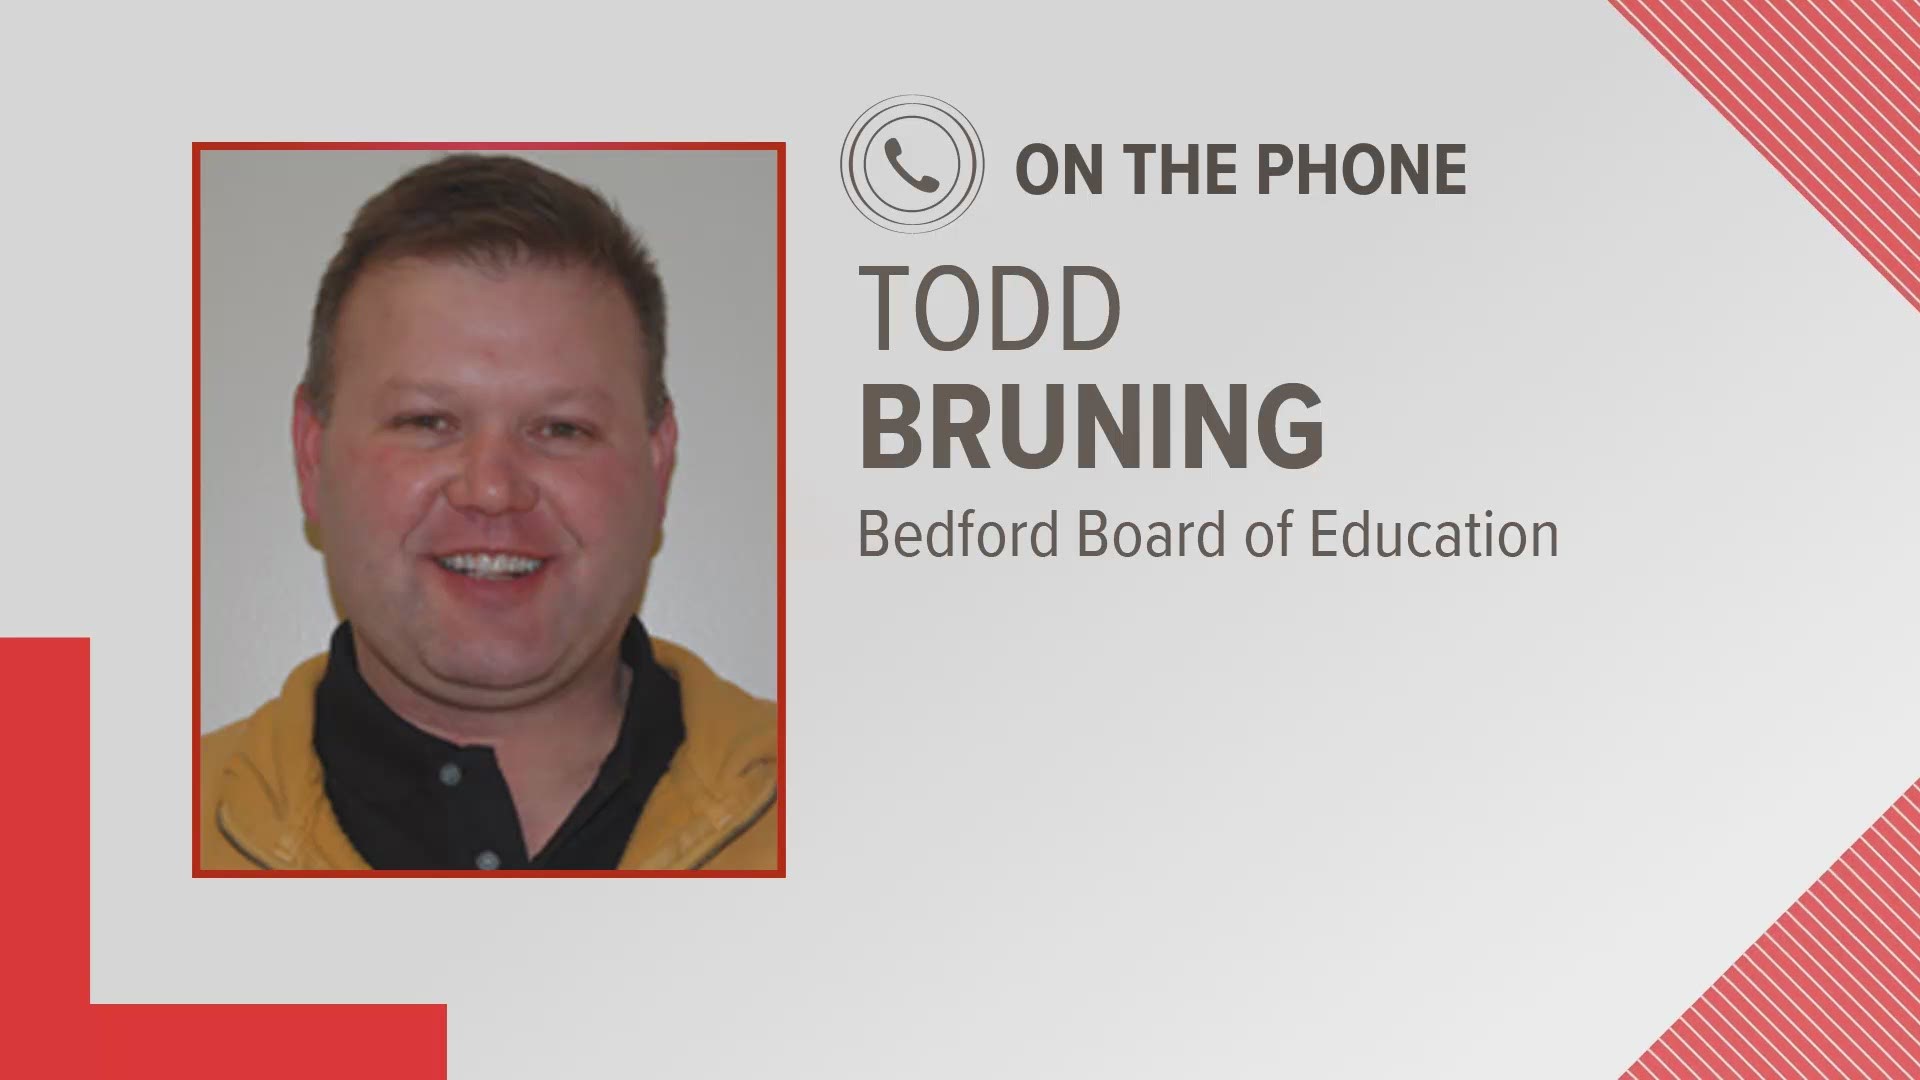 A petition is circulating with over 3,000 signatures calling for Mich. Gov. Gretchen Whitmer to remove Todd Bruning from the Bedford School Board